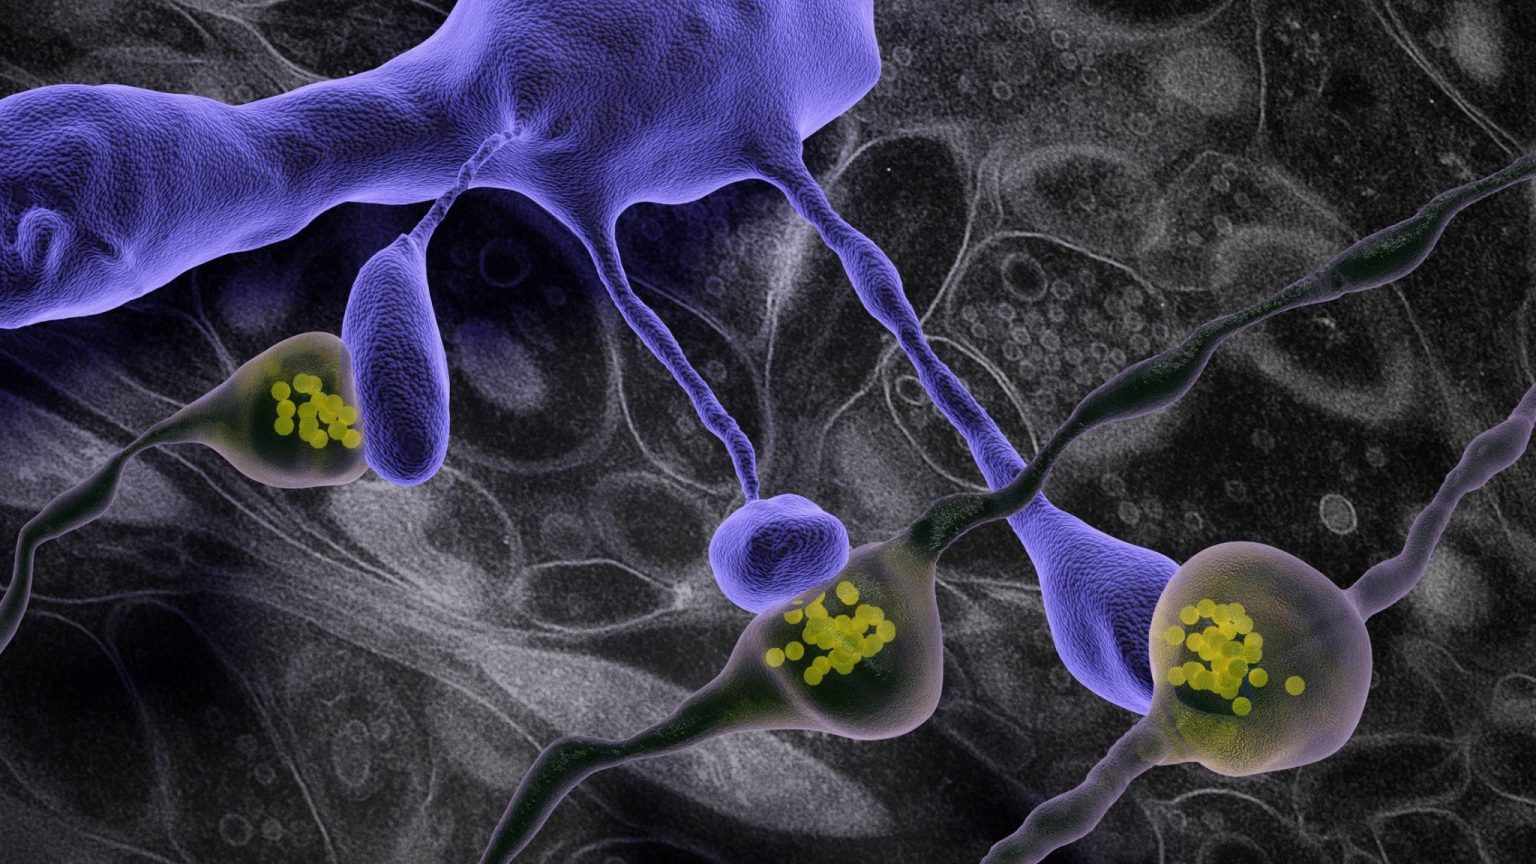 3D model of dendritic spines (purple) making synapses with axons containing vesicles (yellow). Background shows electron microscope image of brain tissue. ©EPFL-Graham Knott